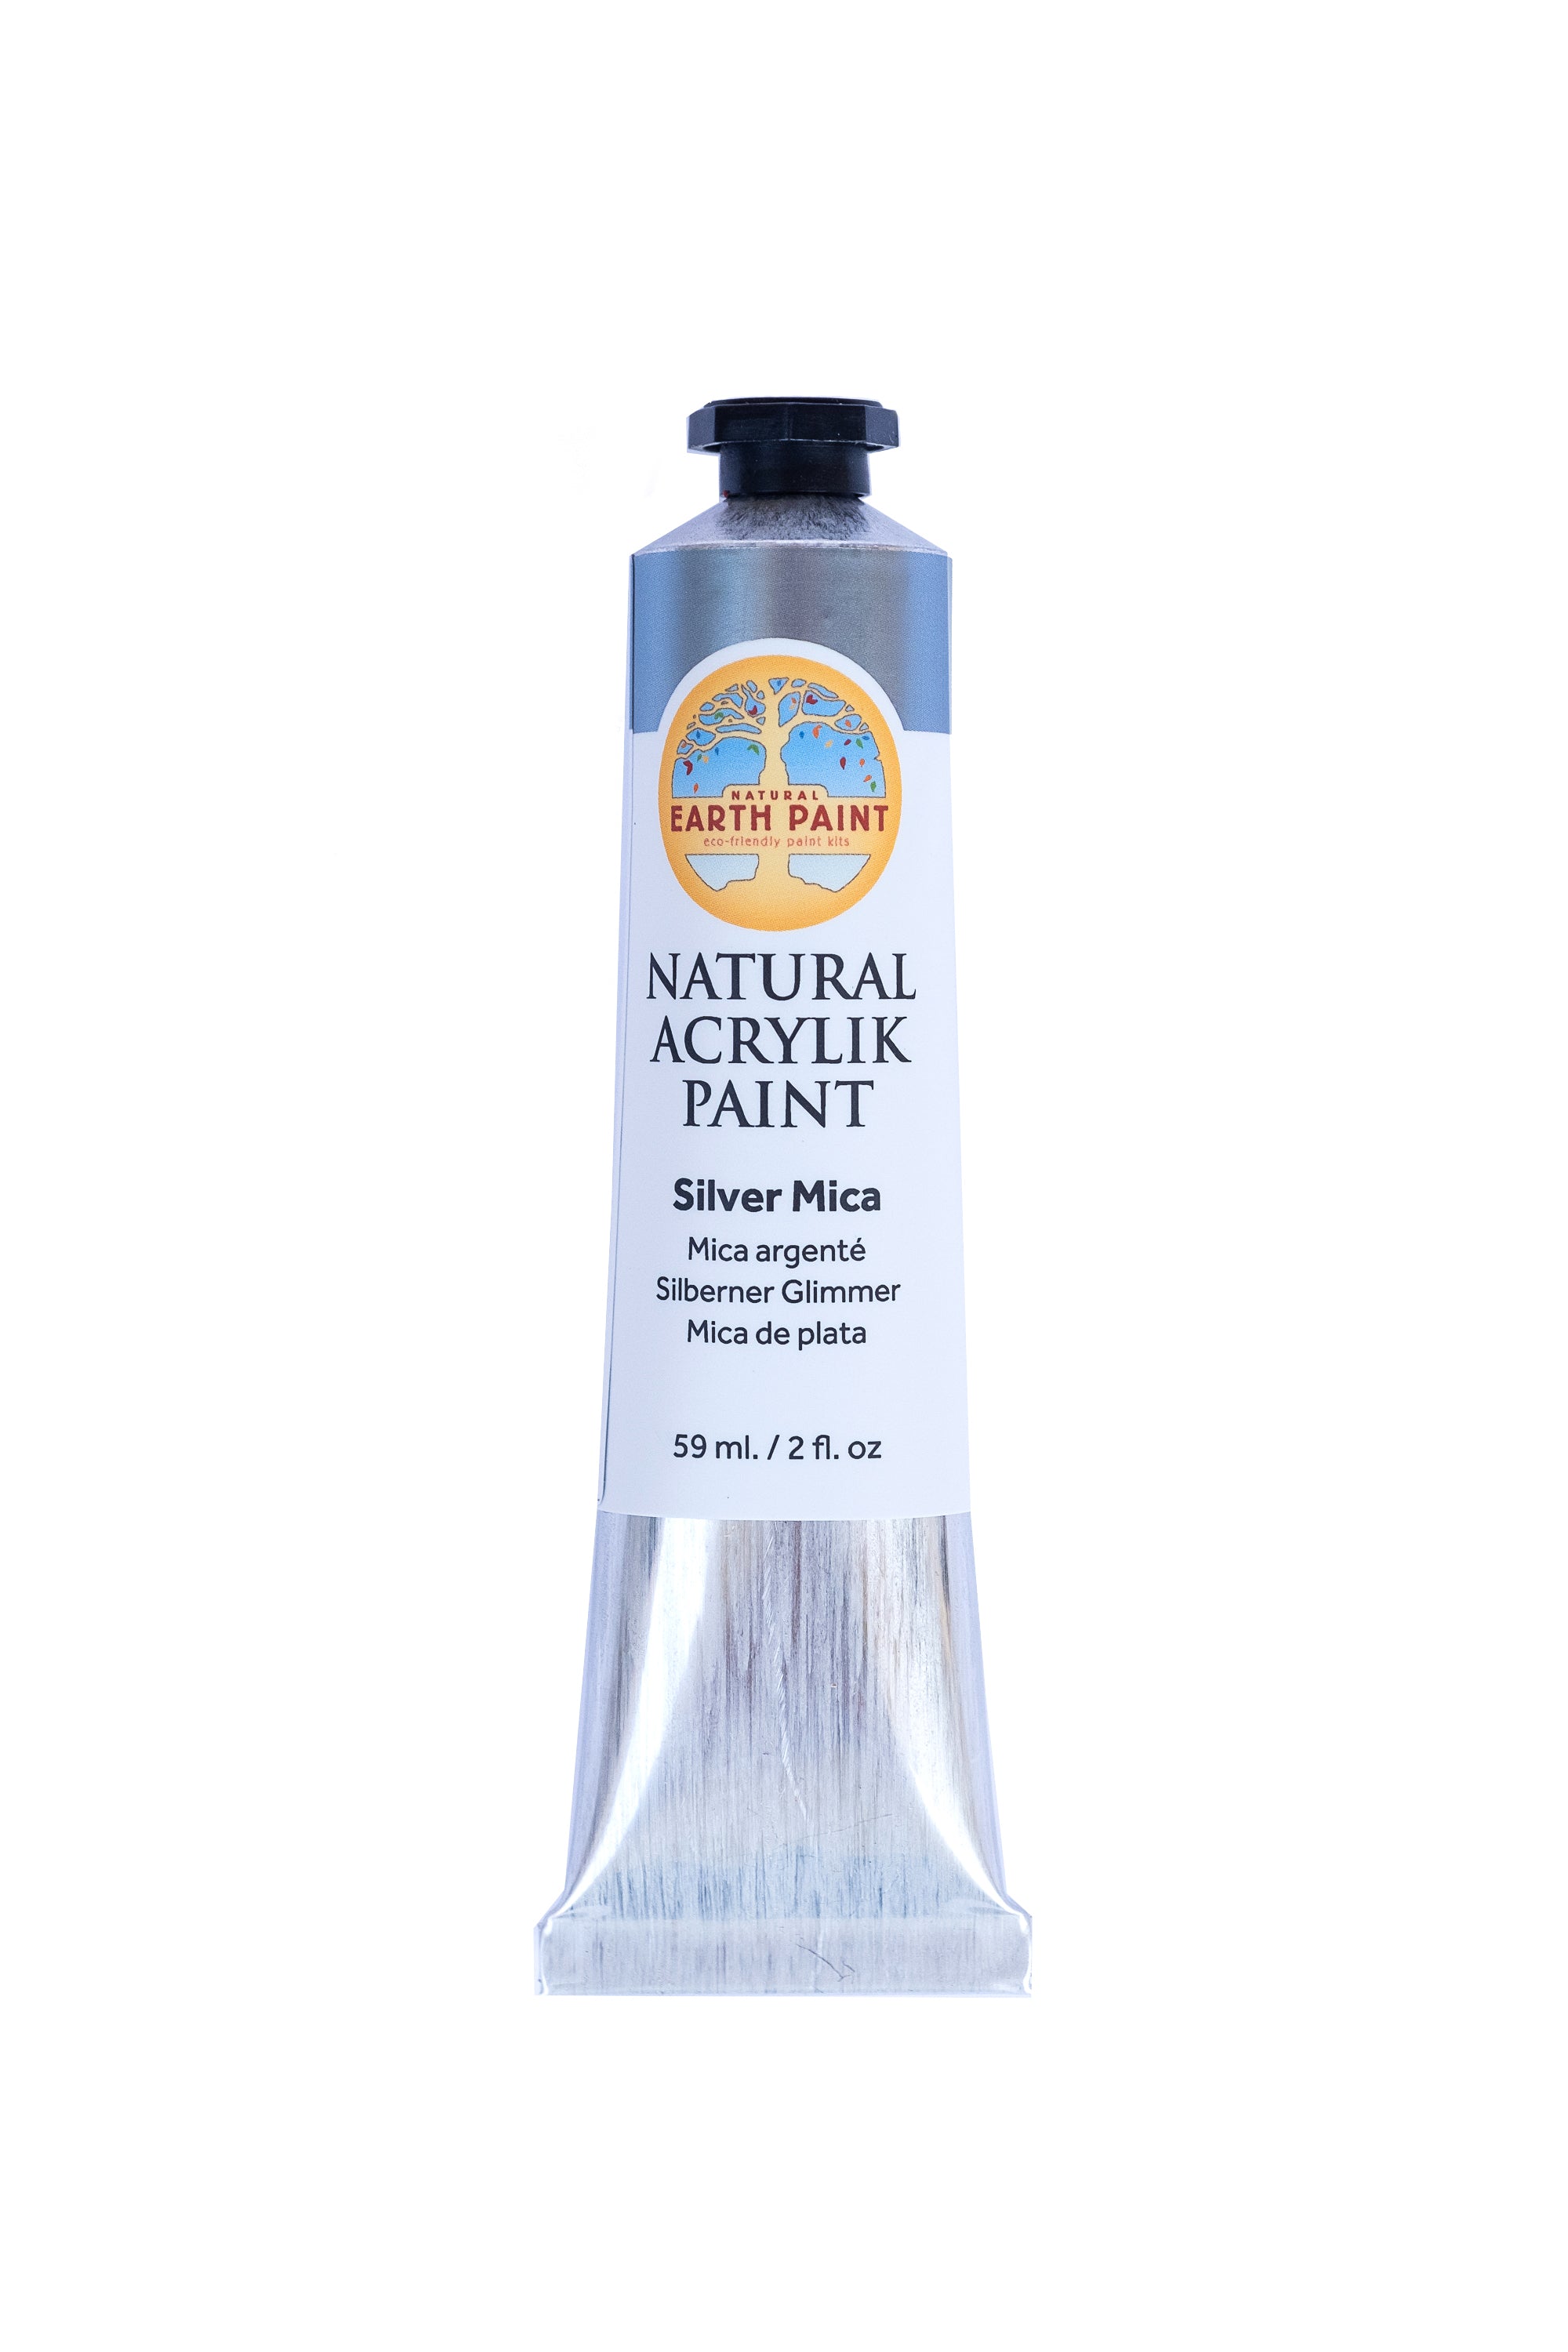 Natural Acrylik Paint™ - Individual Tubes-acrylic, acrylic paint, art, arts and craft, colors from the earth, earth colors, earth paint, earth pigments, eco art supplies, Eco Artist Paints, eco friendly paints, eco-friendly art supplies, eco-friendly paint, Fine Art Supplies Products, natural acrylic, natural artist paints, natural earth colors, natural paint, natural paints, non-toxic paint, nontoxic artist paints, nontoxic artist supplies, nontoxic paints, paint, sustainable art supplies-Silver Mica-Natur